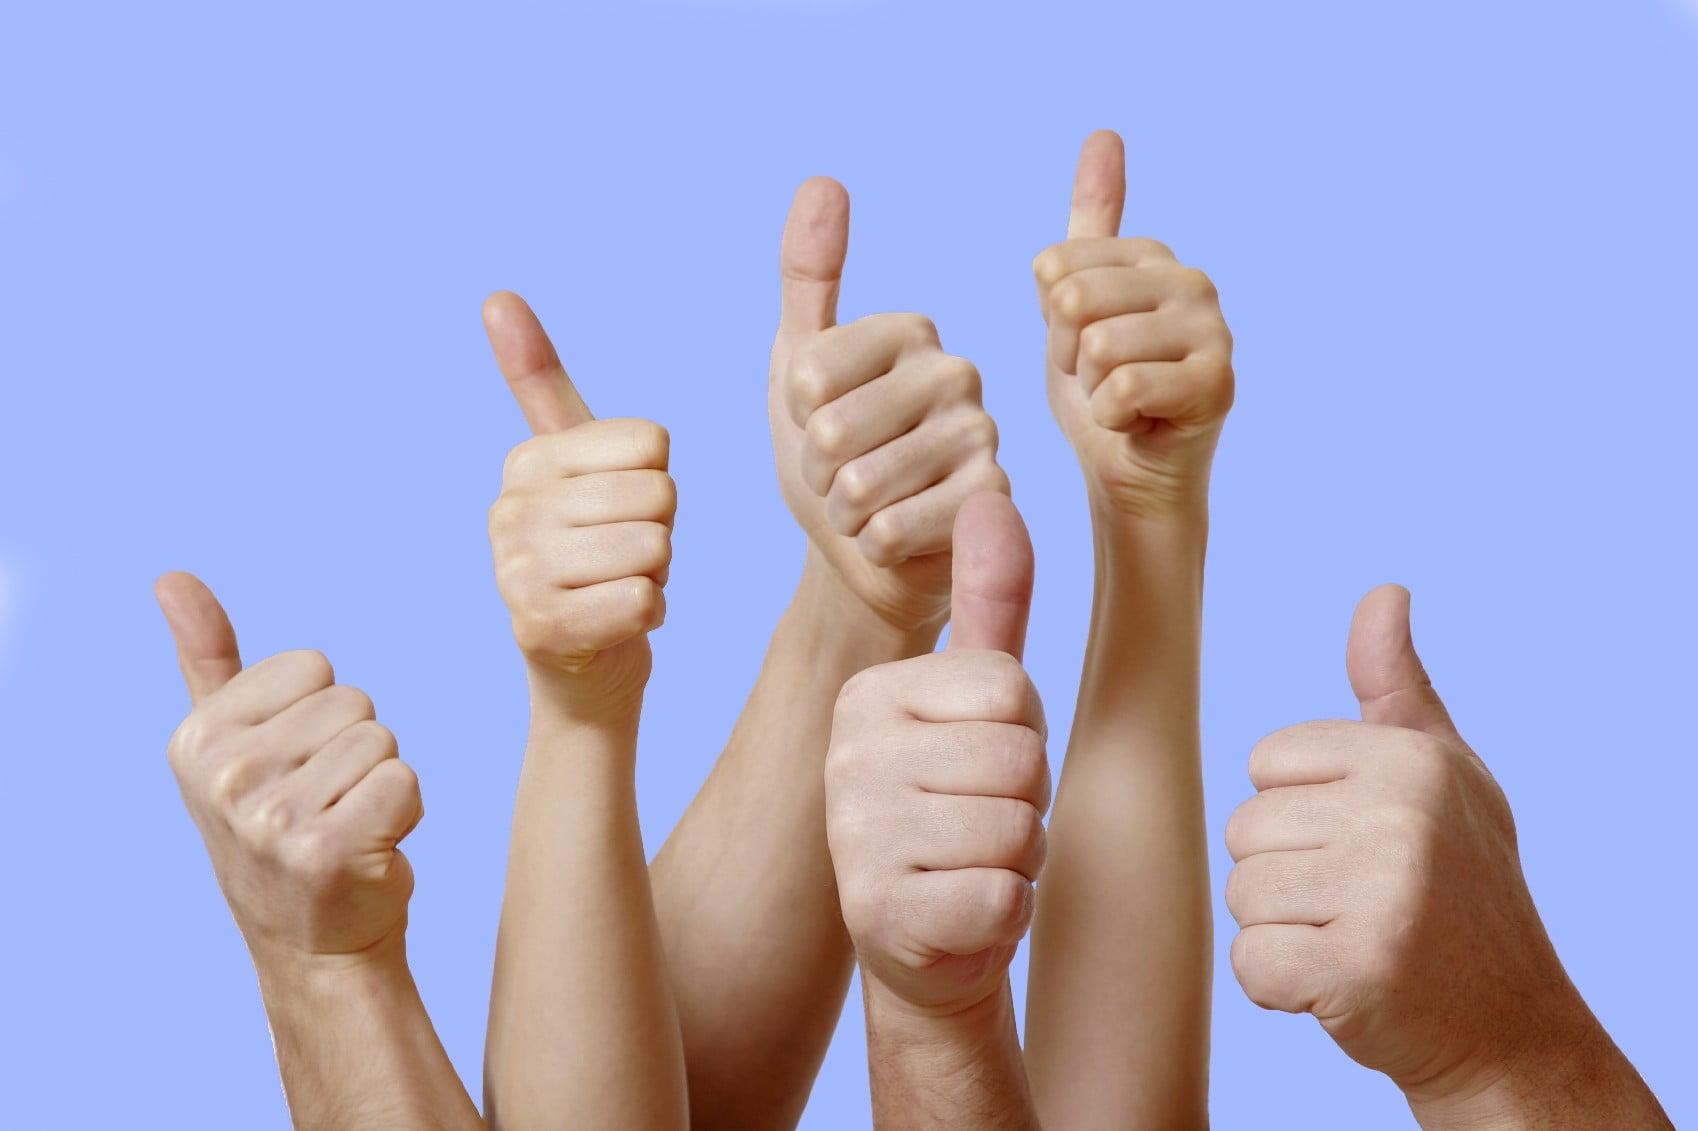 person's hands, human hand, human body part, cooperation, thumbs up